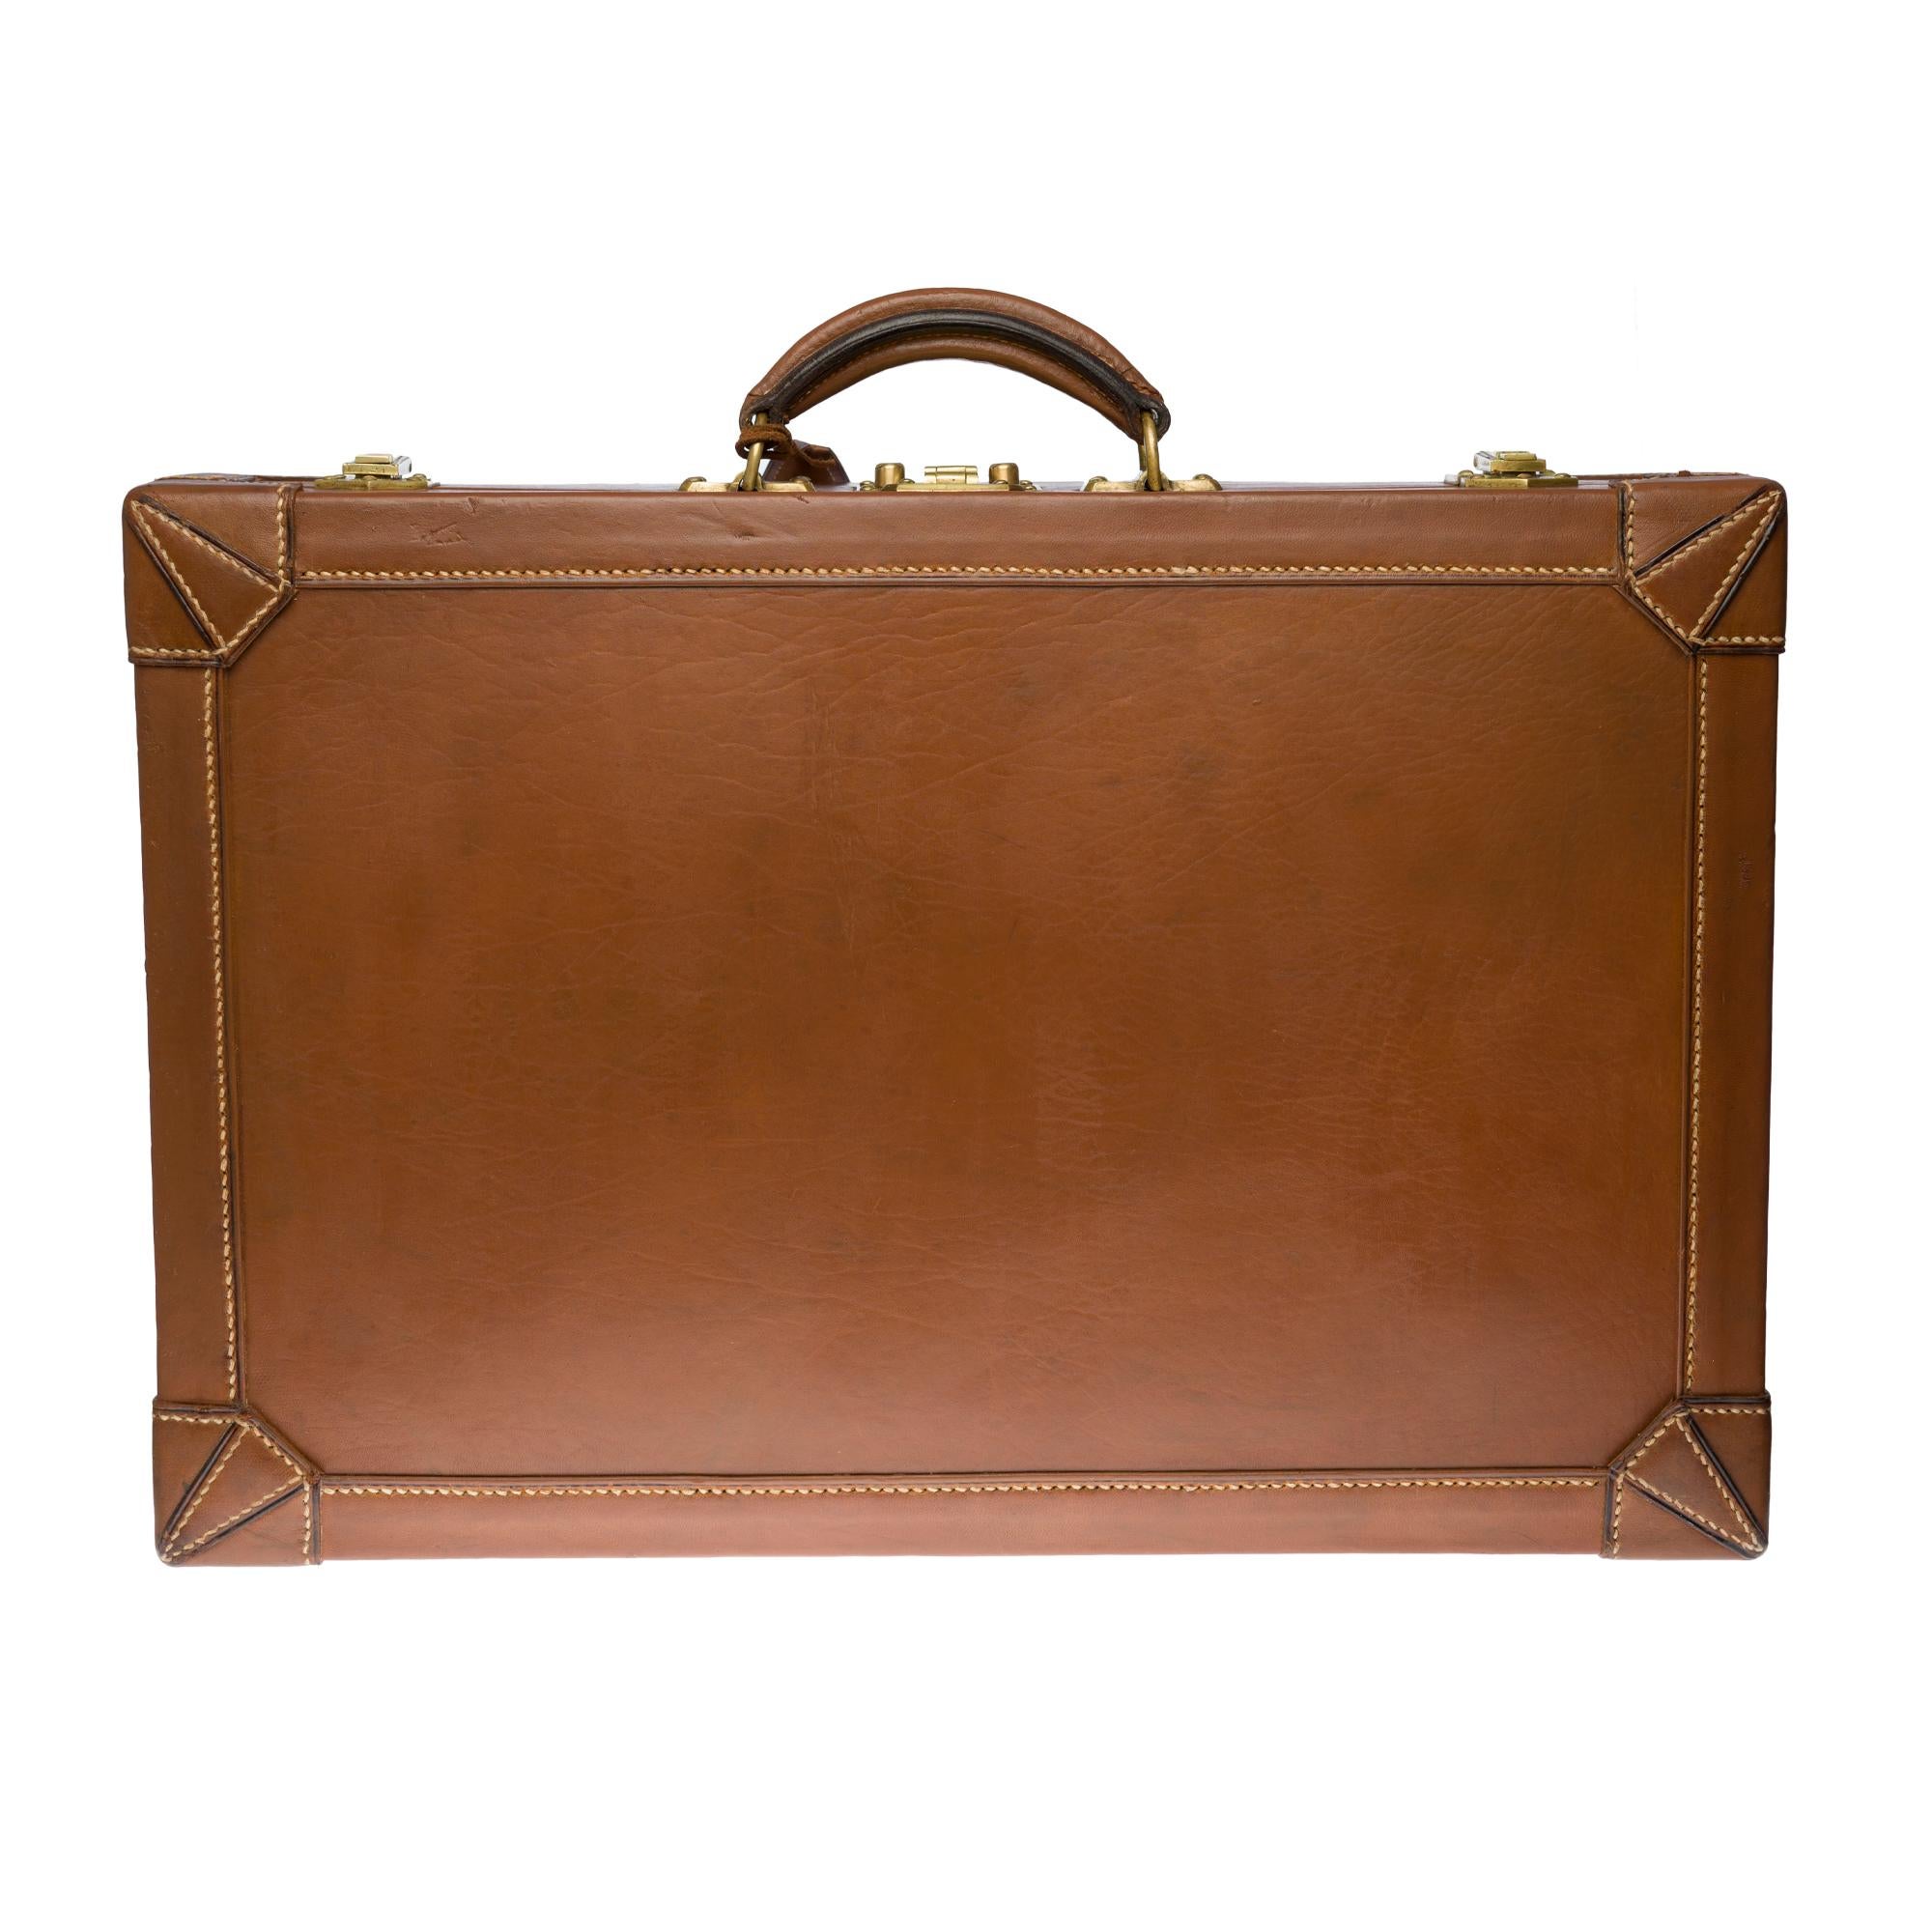 Beautiful Collector & Decorative Object:

Superb and Rare Hermès case covered in brown cow leather, brass trim, natural leather handle allowing a handheld.
Three brass clasps.
5 feet of brass bottom.
Signature: 